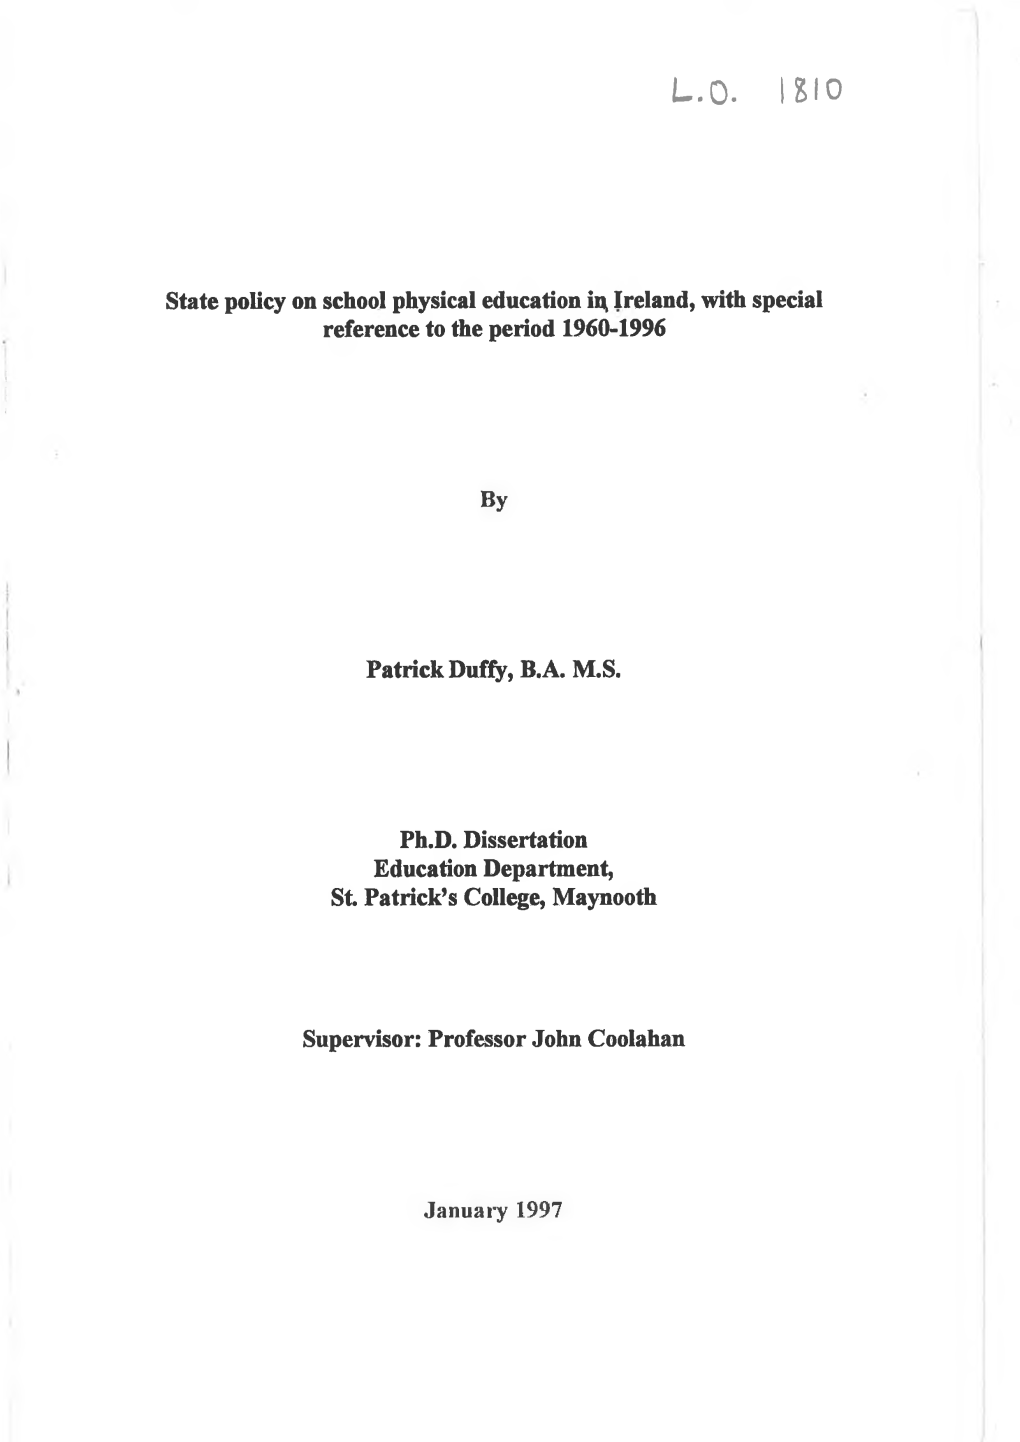 State Policy on School Physical Education In, Ireland, with Special Reference to the Period 1960-1996